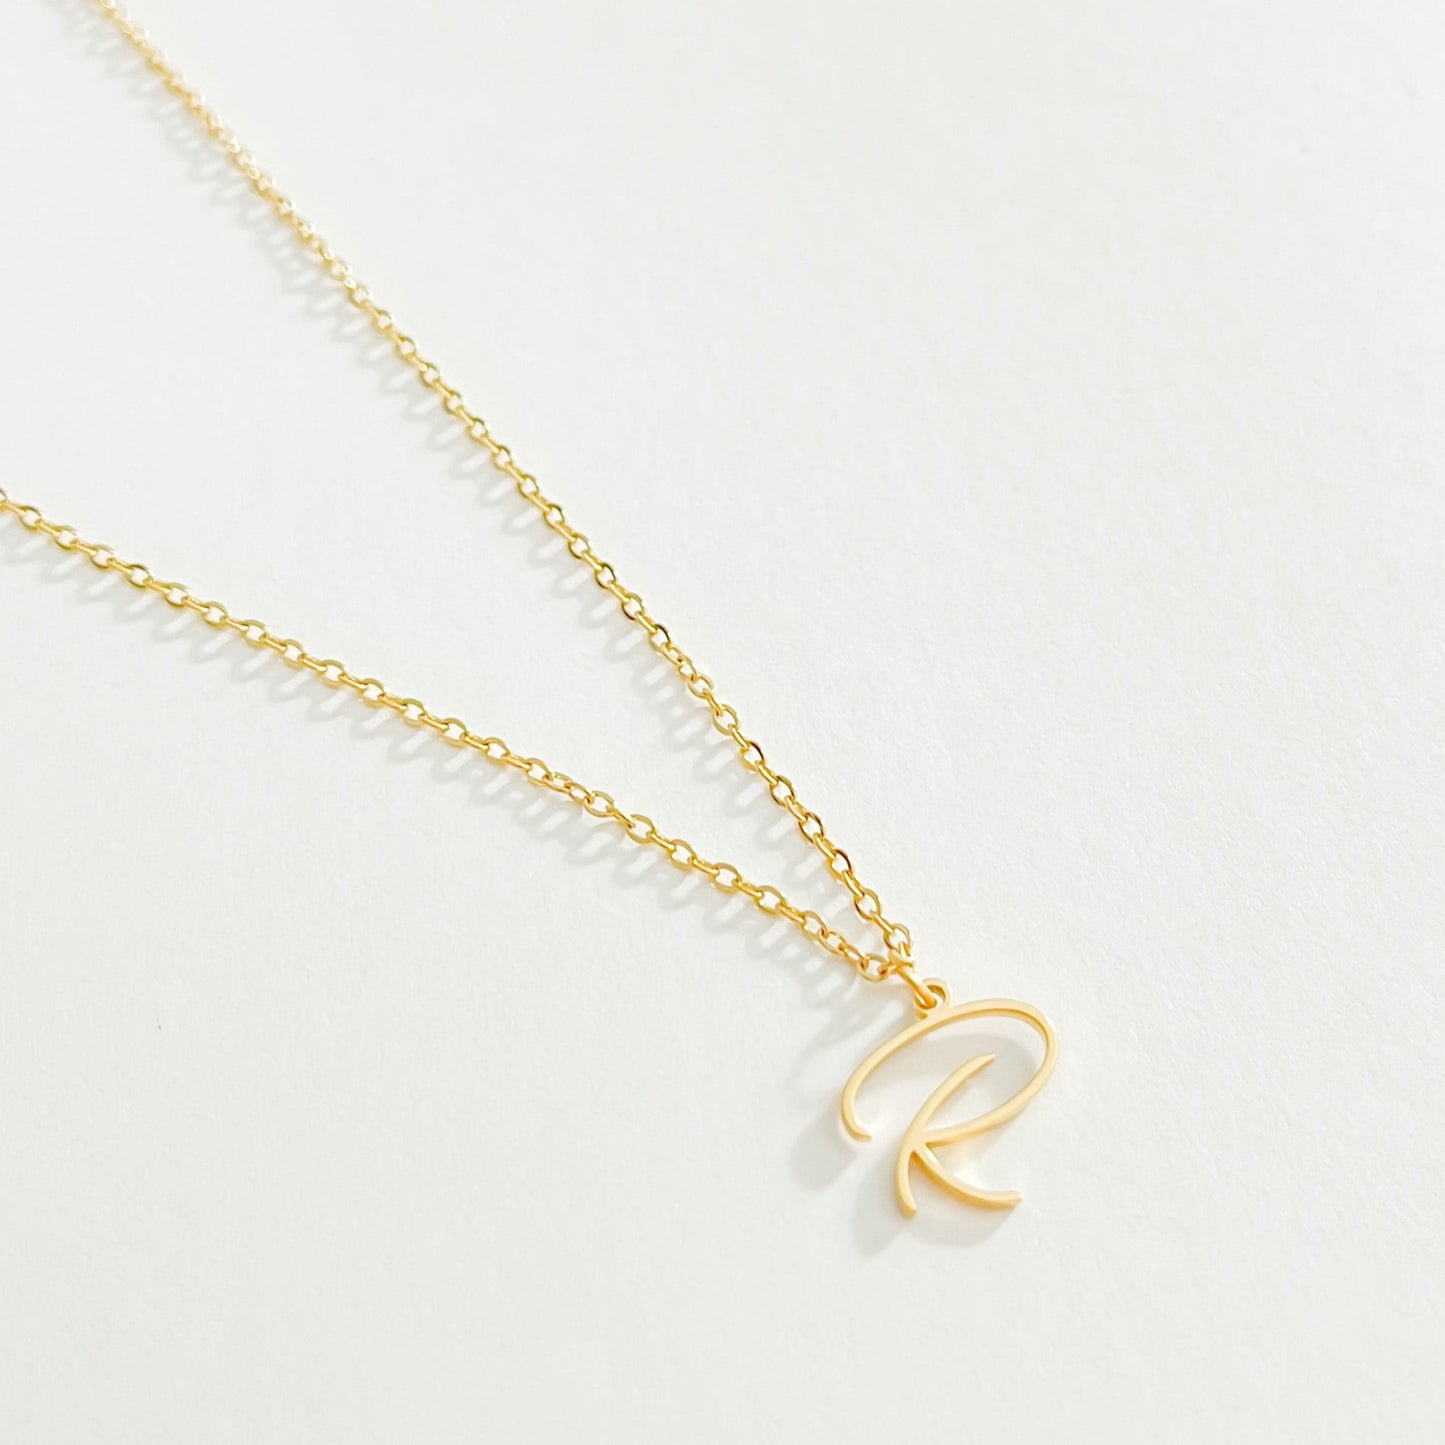 DAINTY CURSIVE INITIAL NECKLACE